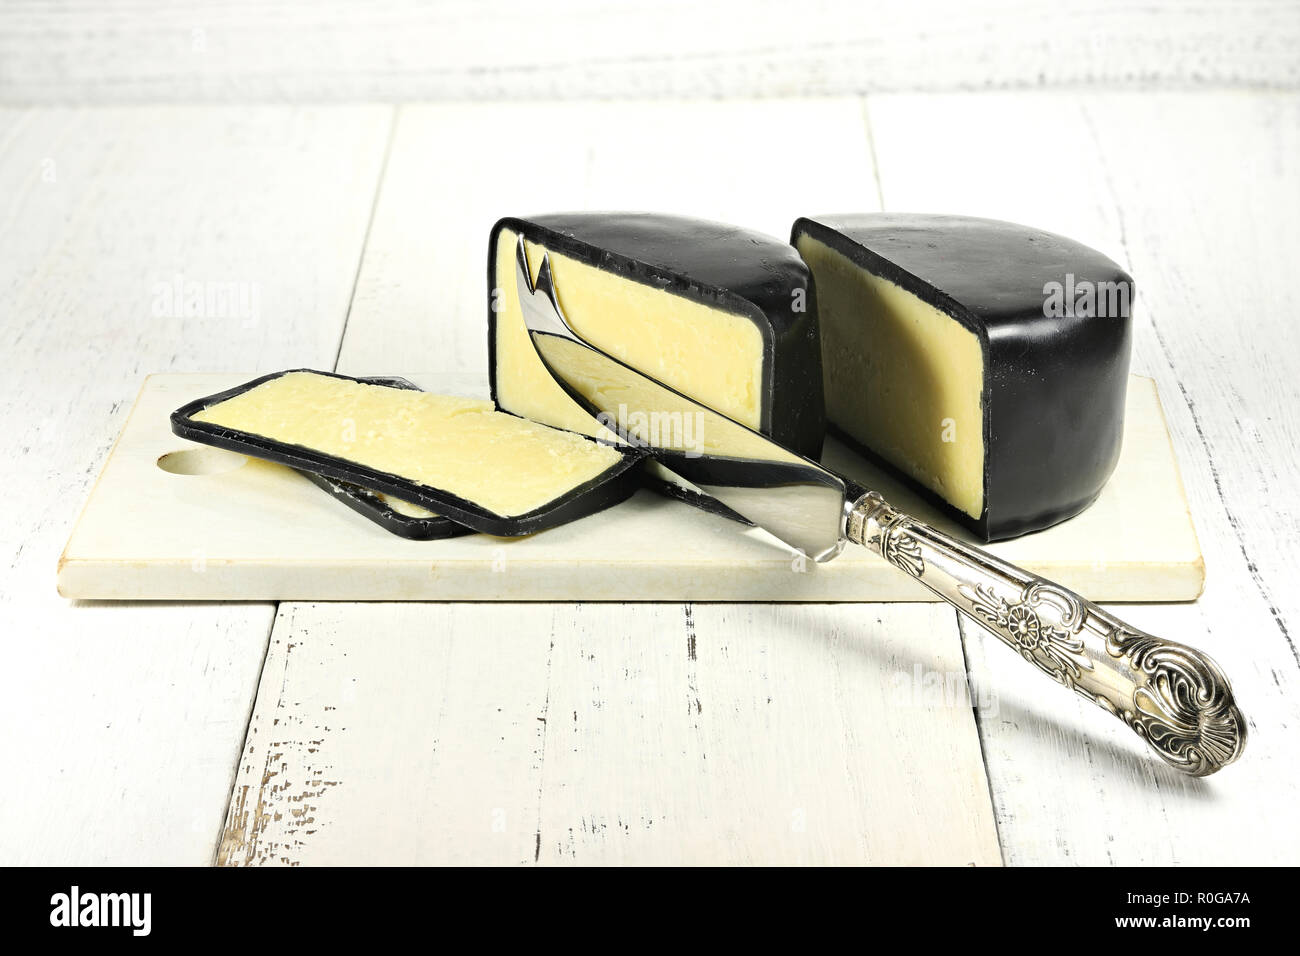 mature cheddar cheese with silver knife and ceramic cutting board isolated on wooden background Stock Photo